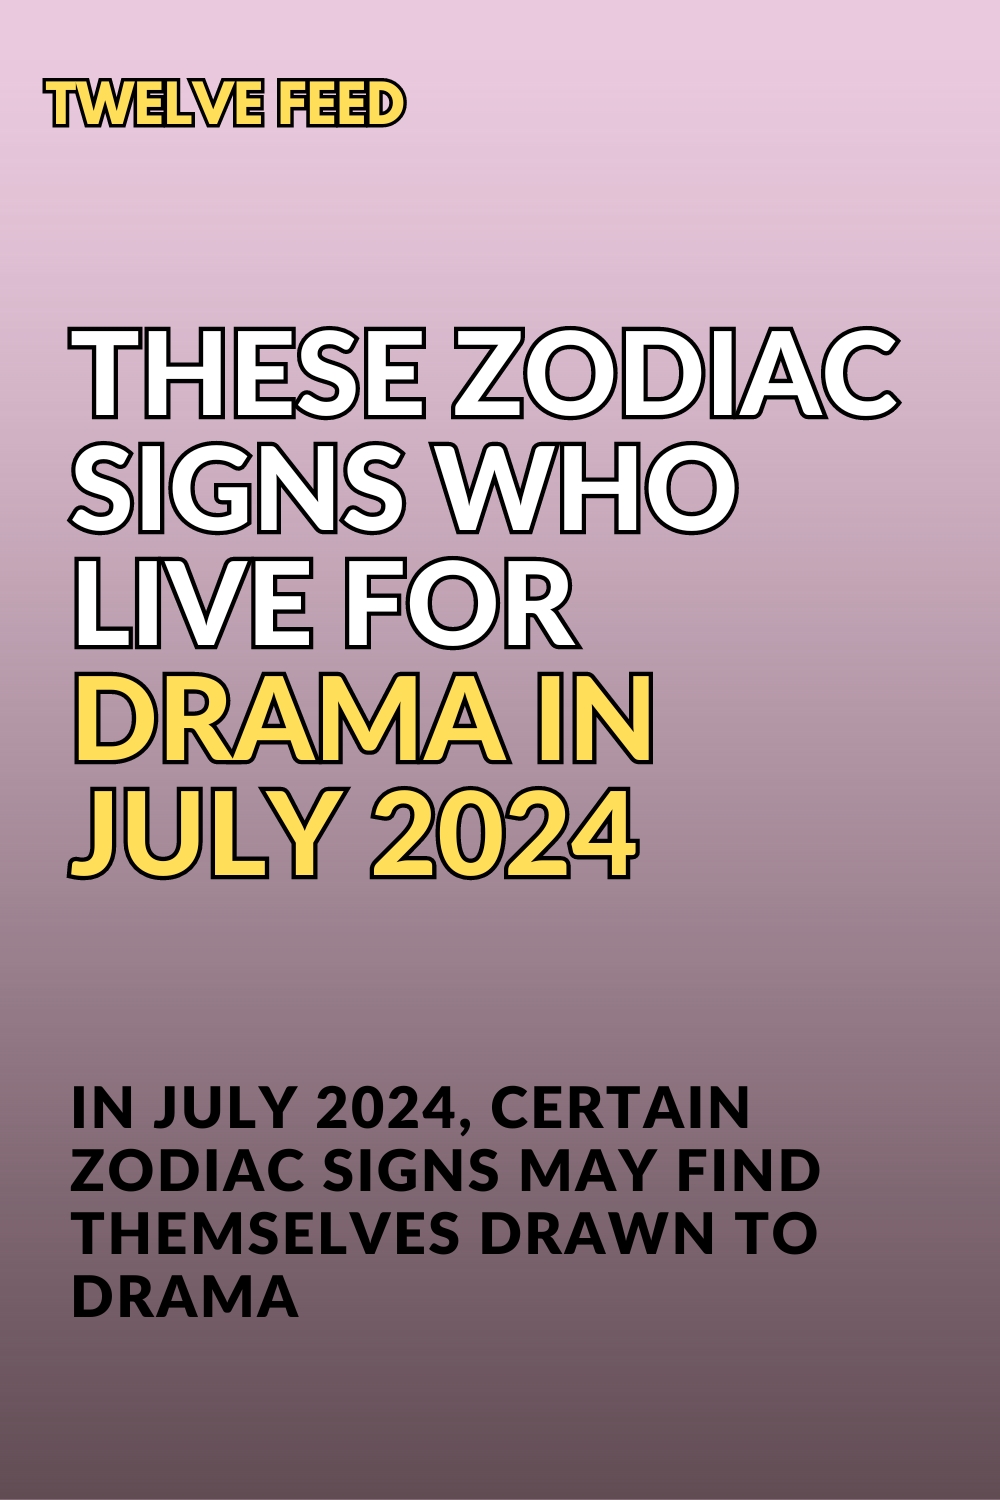 These Zodiac Signs Who Live For Drama In July 2024